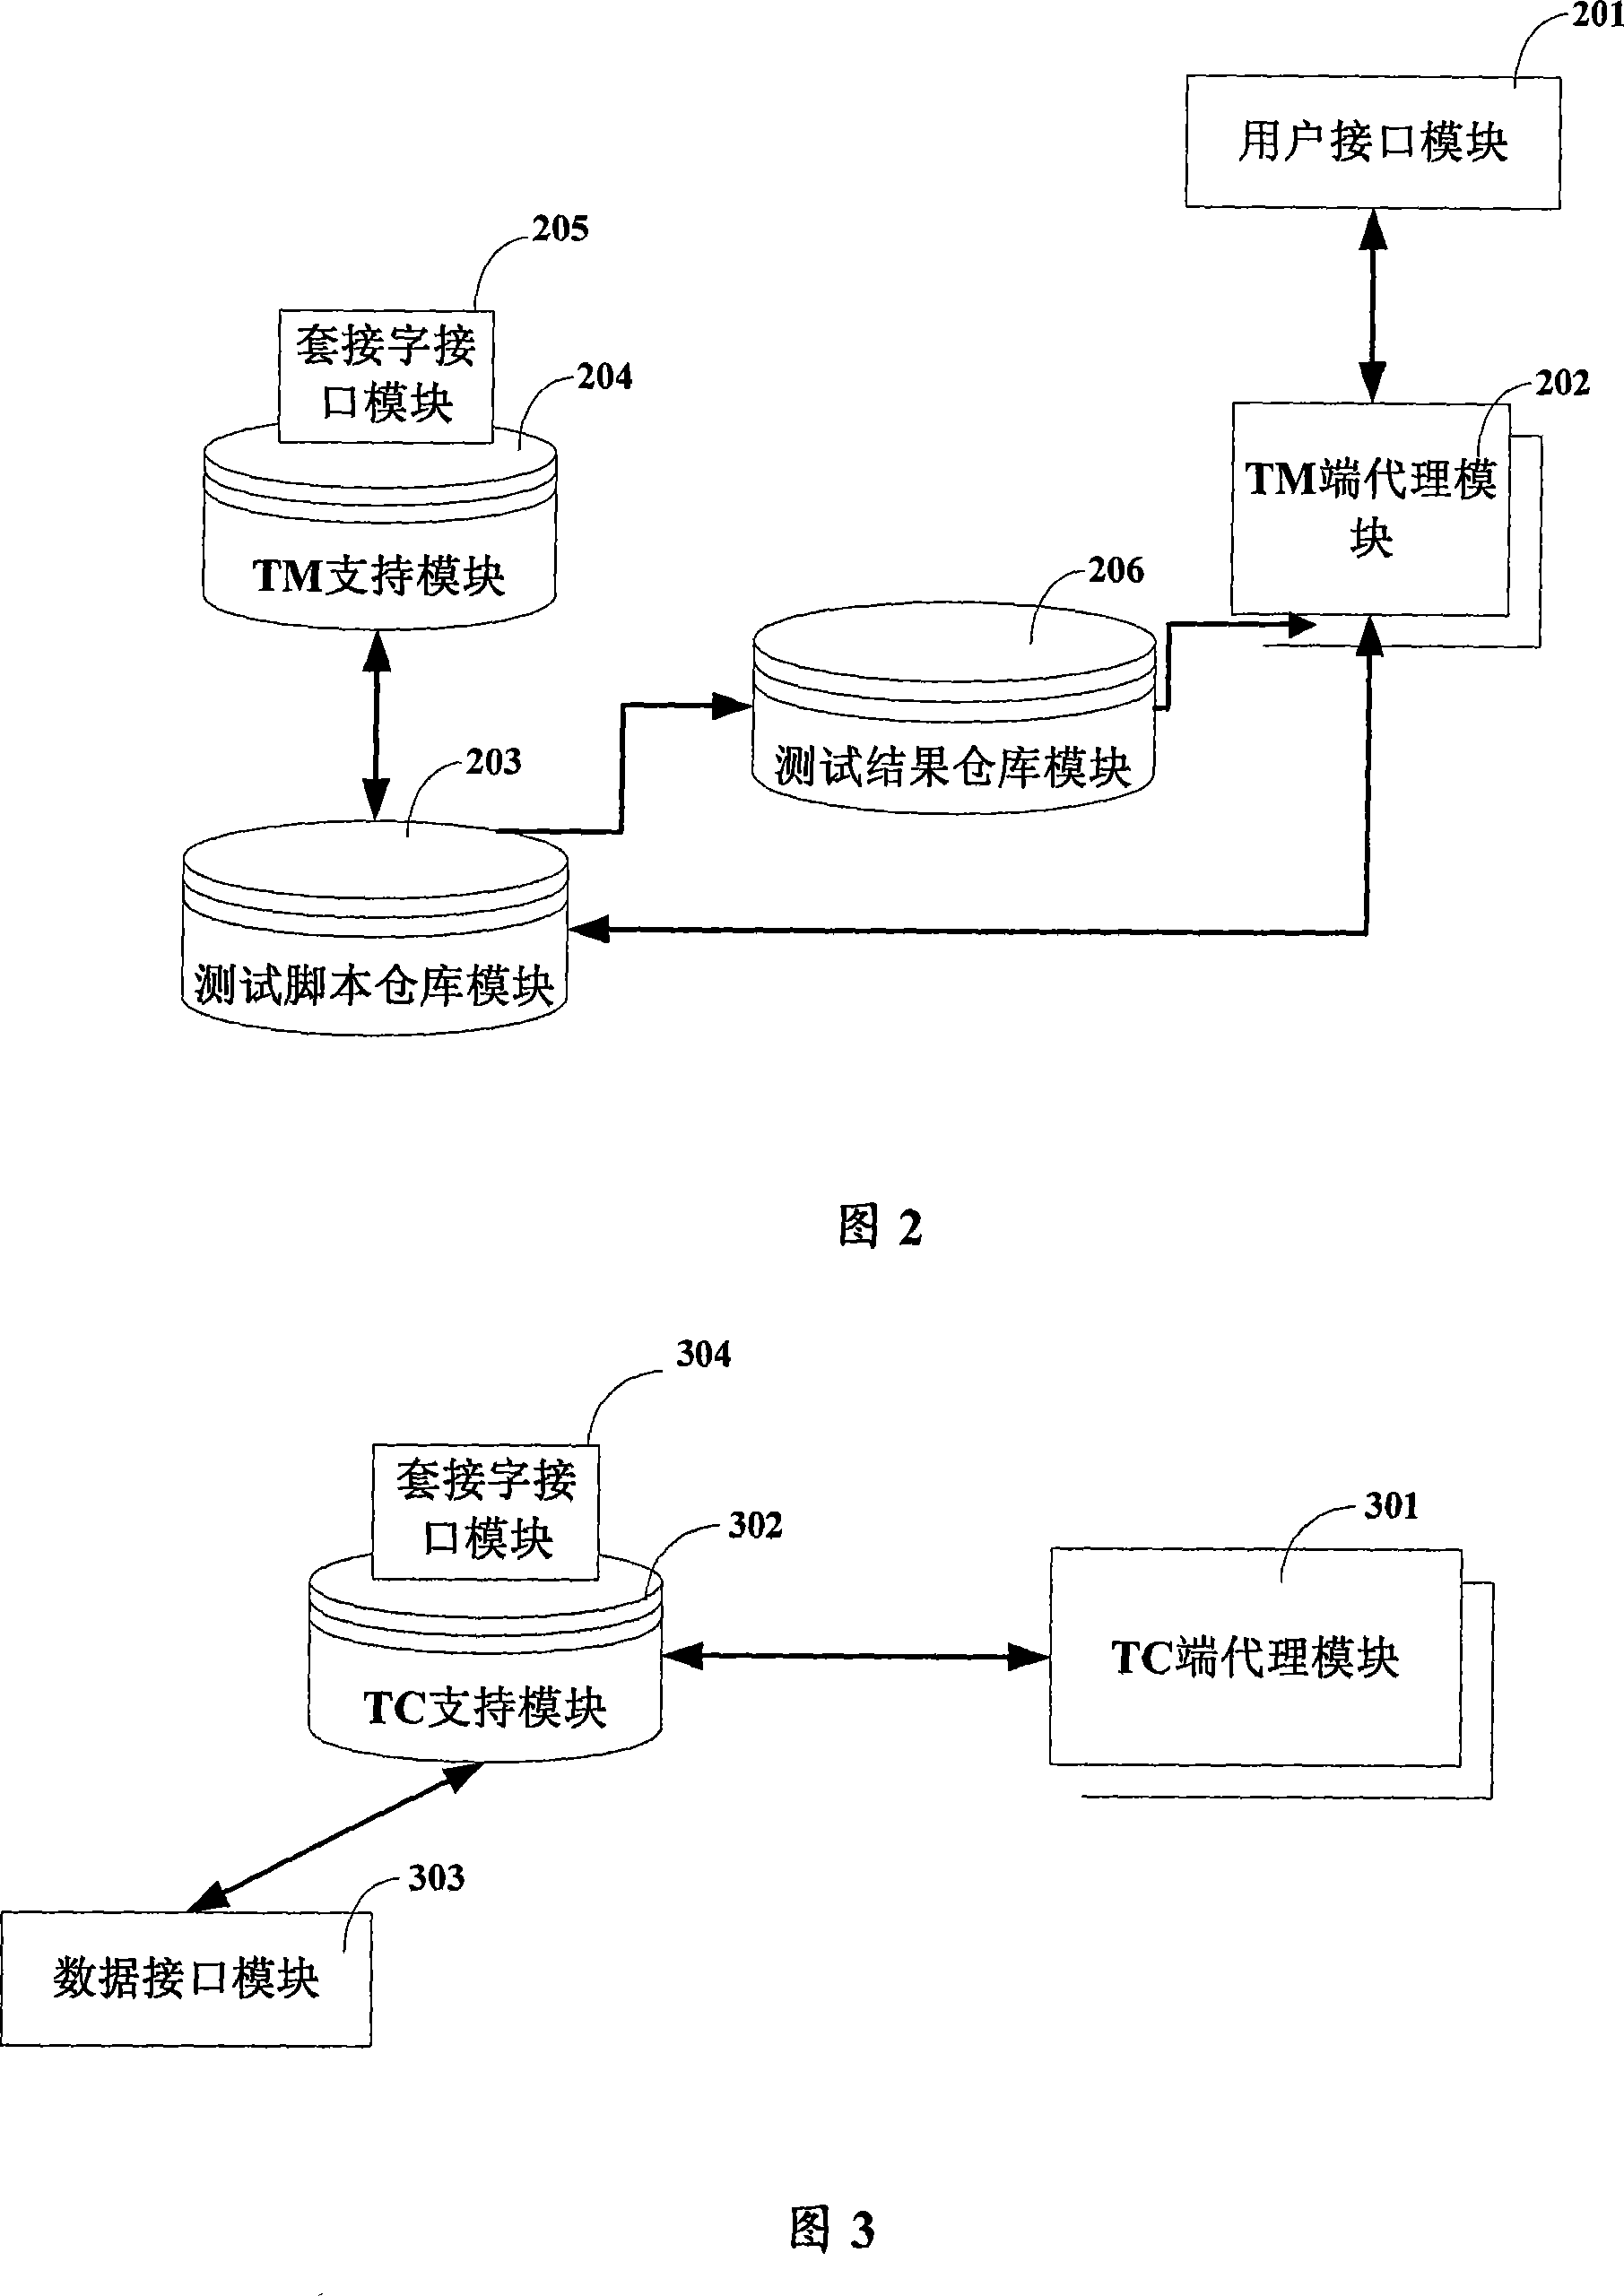 Centralizing automatic testing device and method for testing radio local network